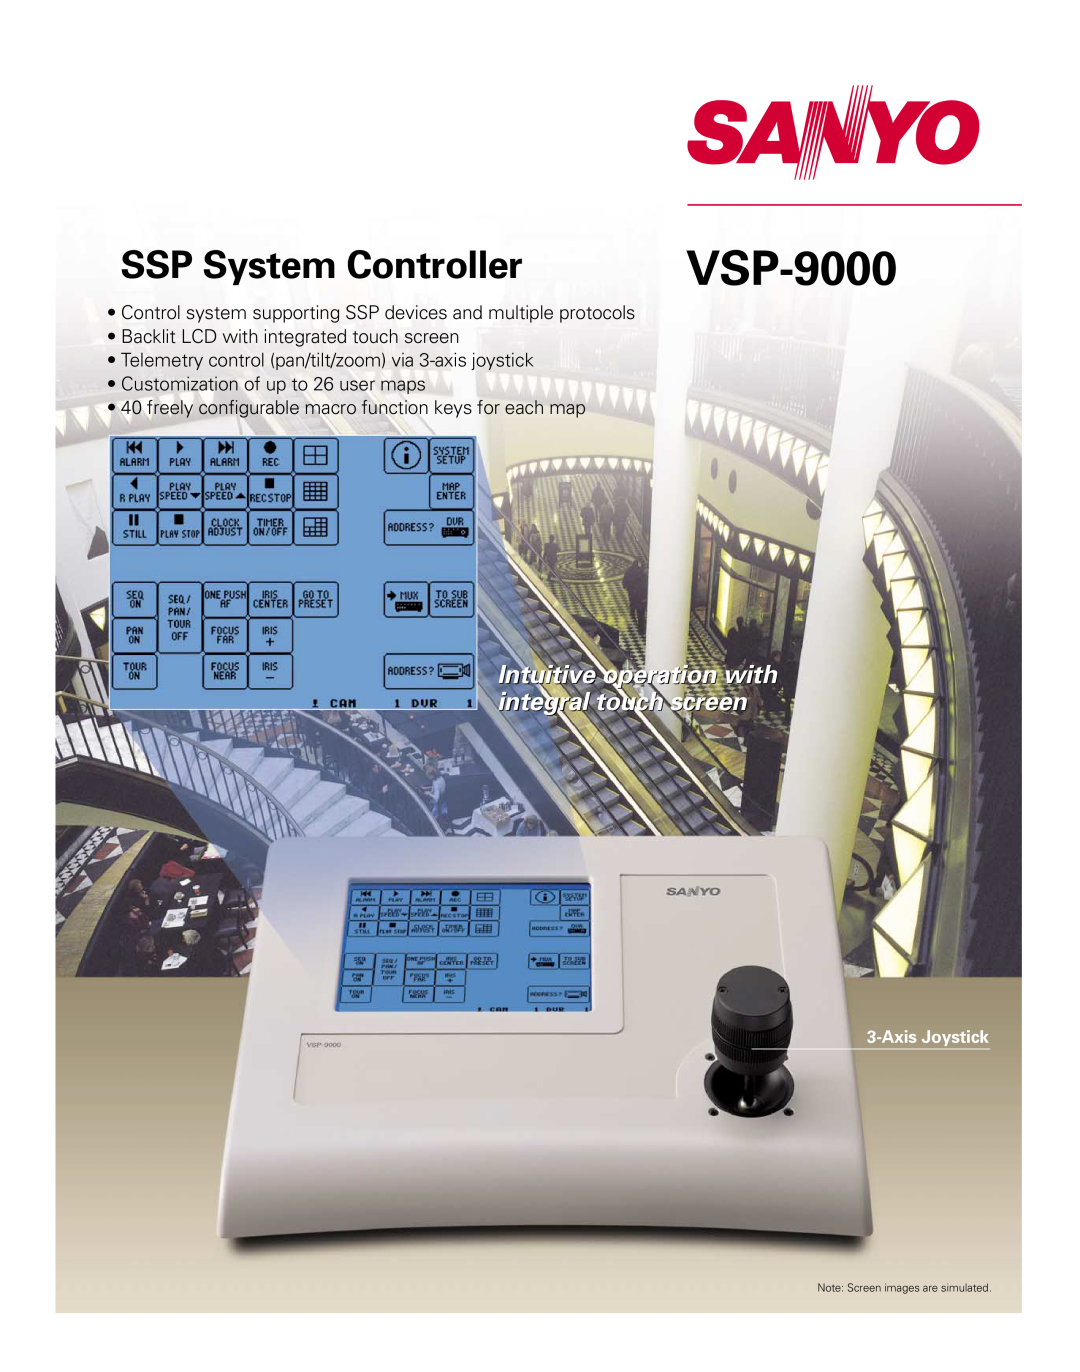 Sanyo VSP-9000 manual SSP System Controller, Intuitive operation with integral touch screen 